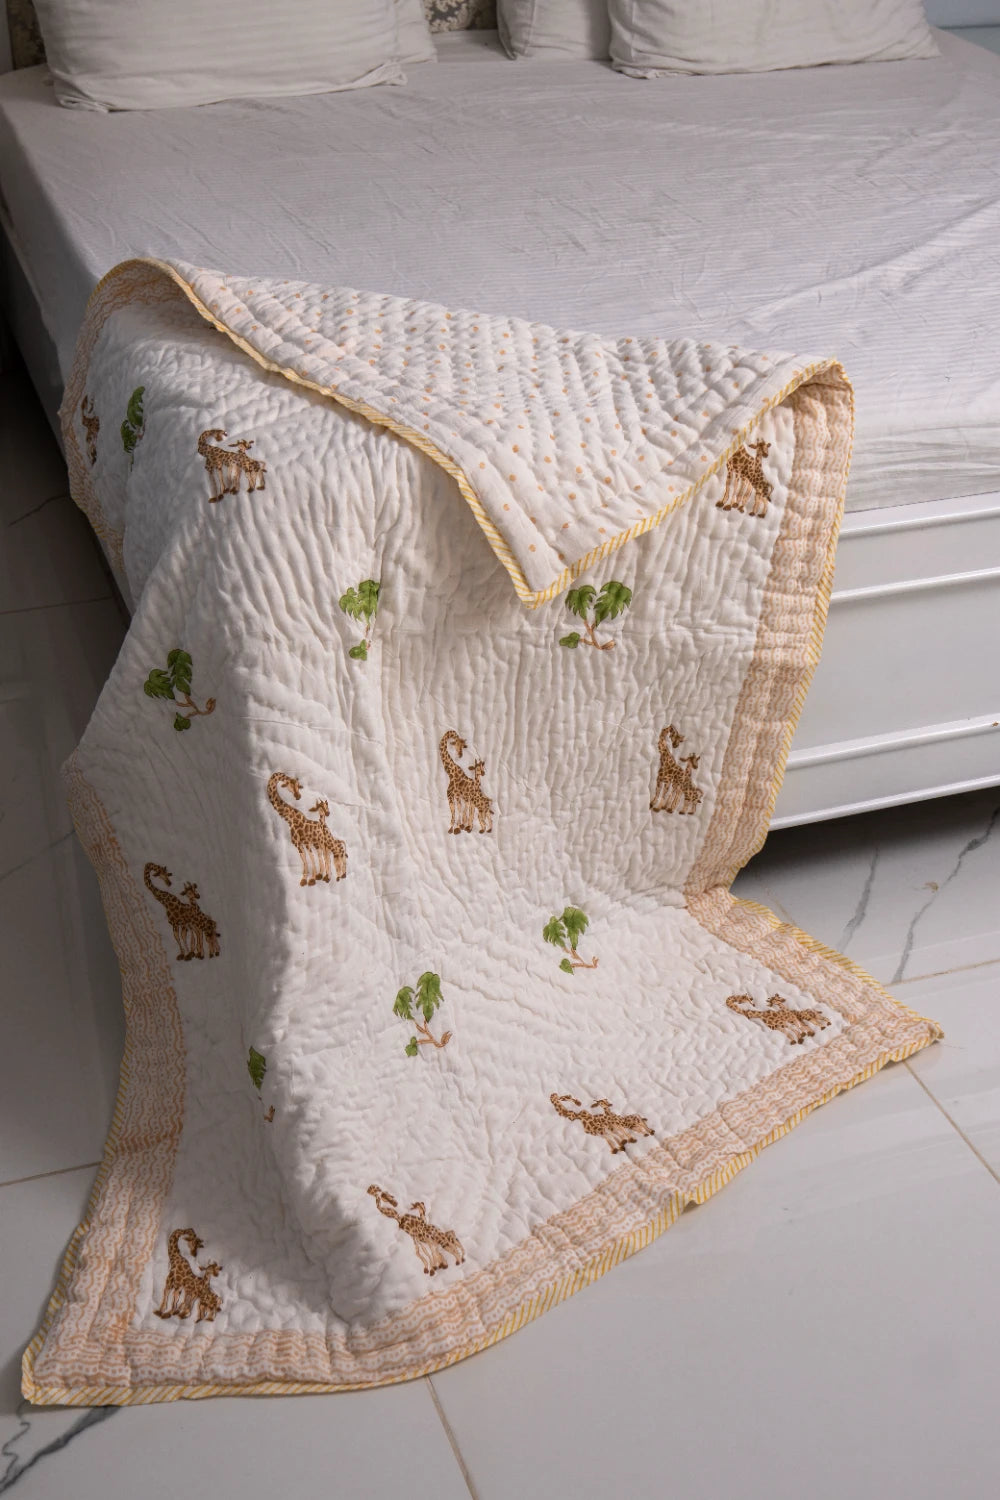 Hand Block Print Mulmul Cotton Baby Blanket: Unmatched Quality